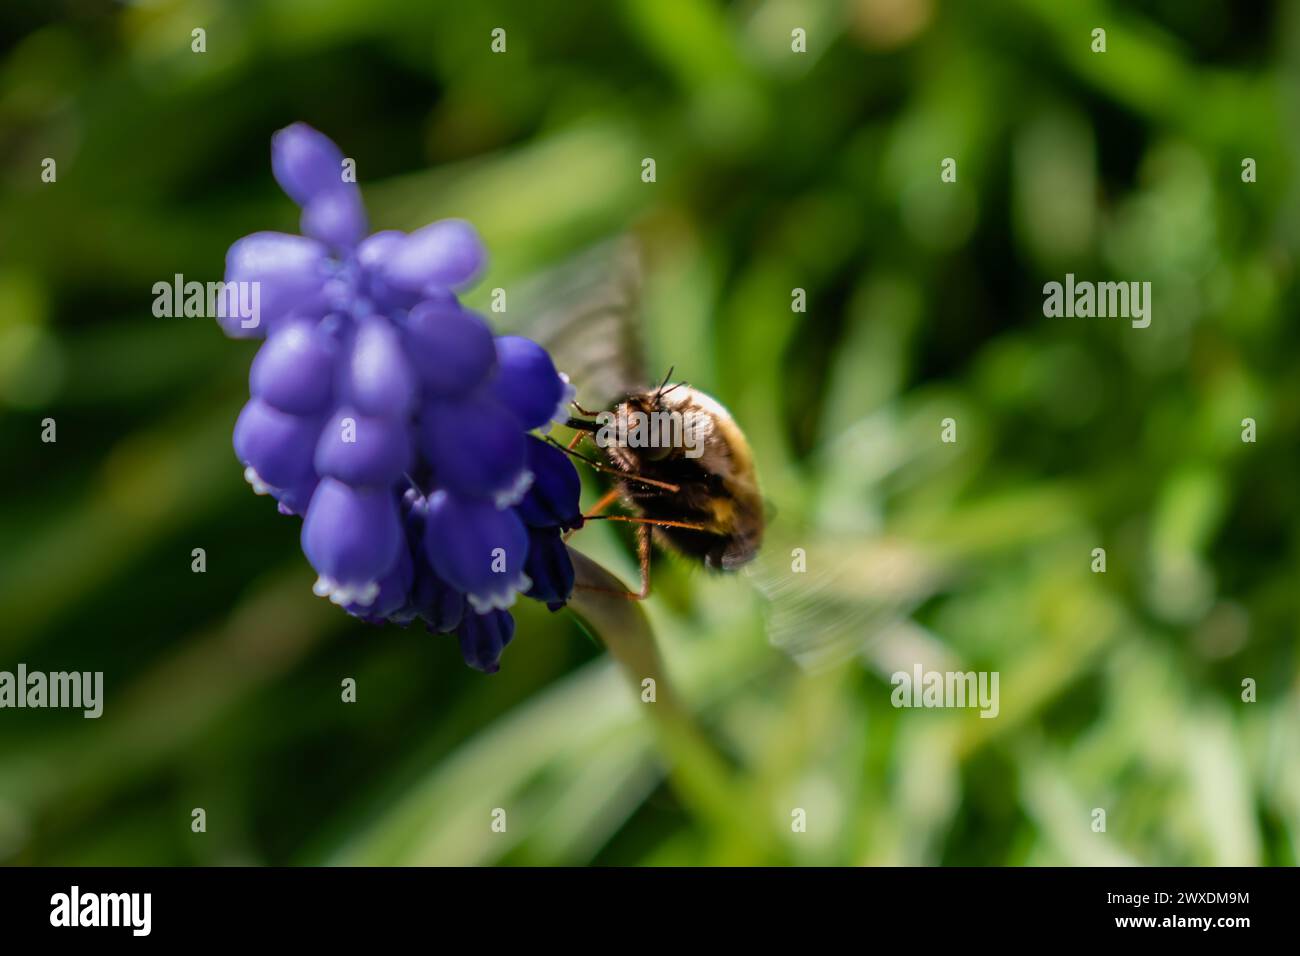 Bombyle on a grape hyacinth, a small hairy insect with a proboscis to draw nectar from the flowers, bombylius Stock Photo